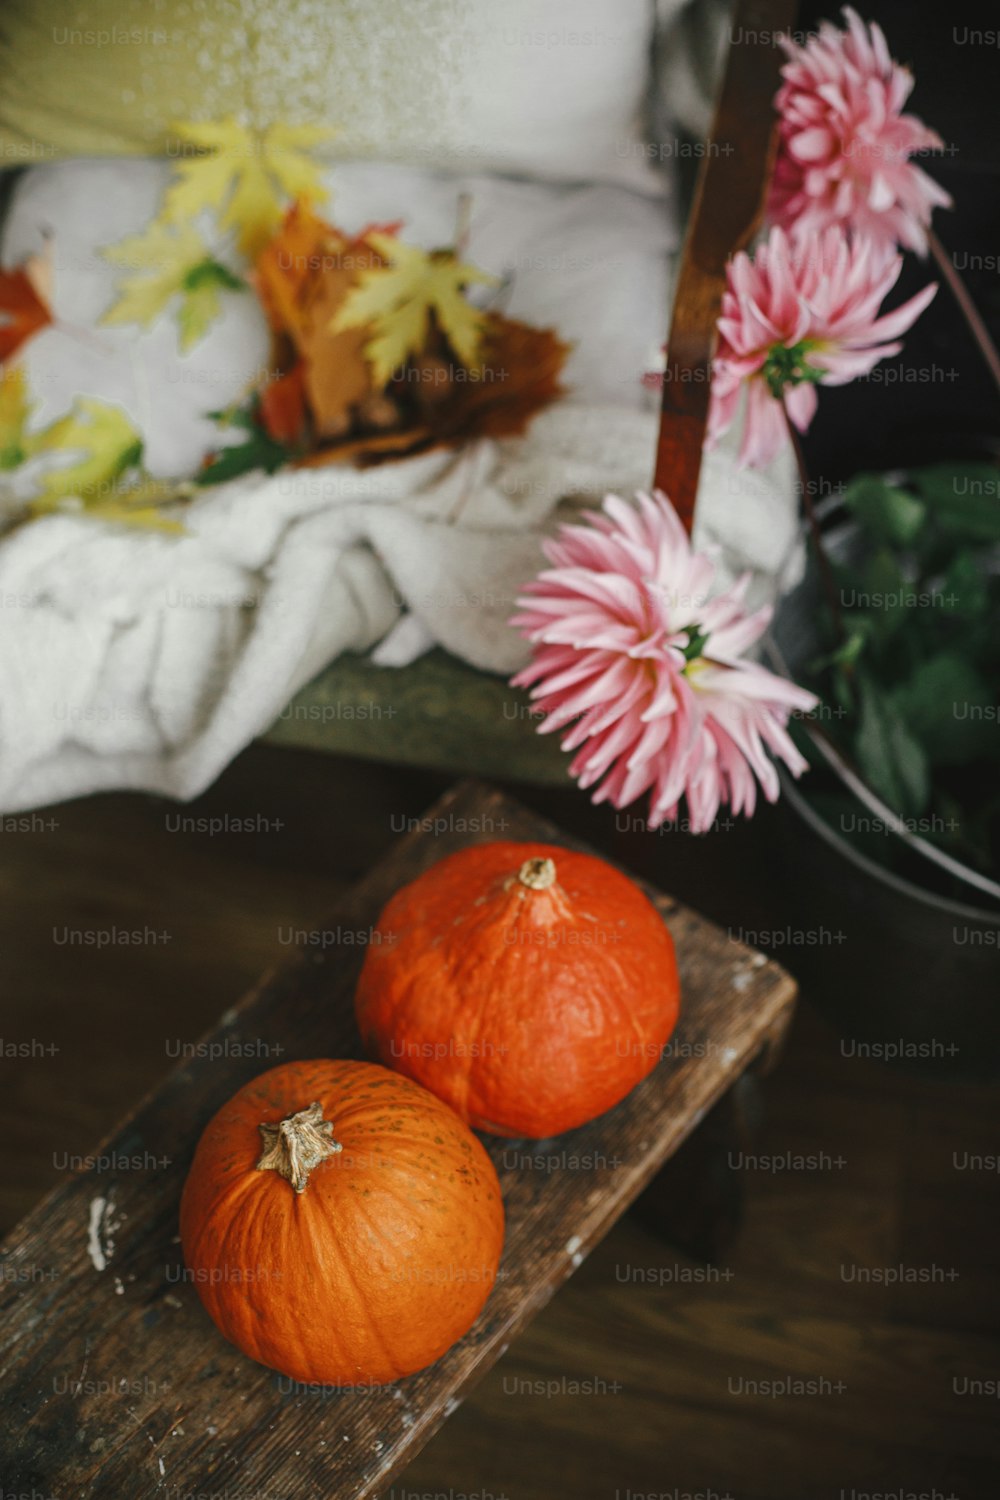 Autumn season in countryside, rural slow life. Beautiful pumpkins on wooden bench, colorful dahlias bouquet in metal bucket and leaves on cozy rustic chair in room. Authentic home moment